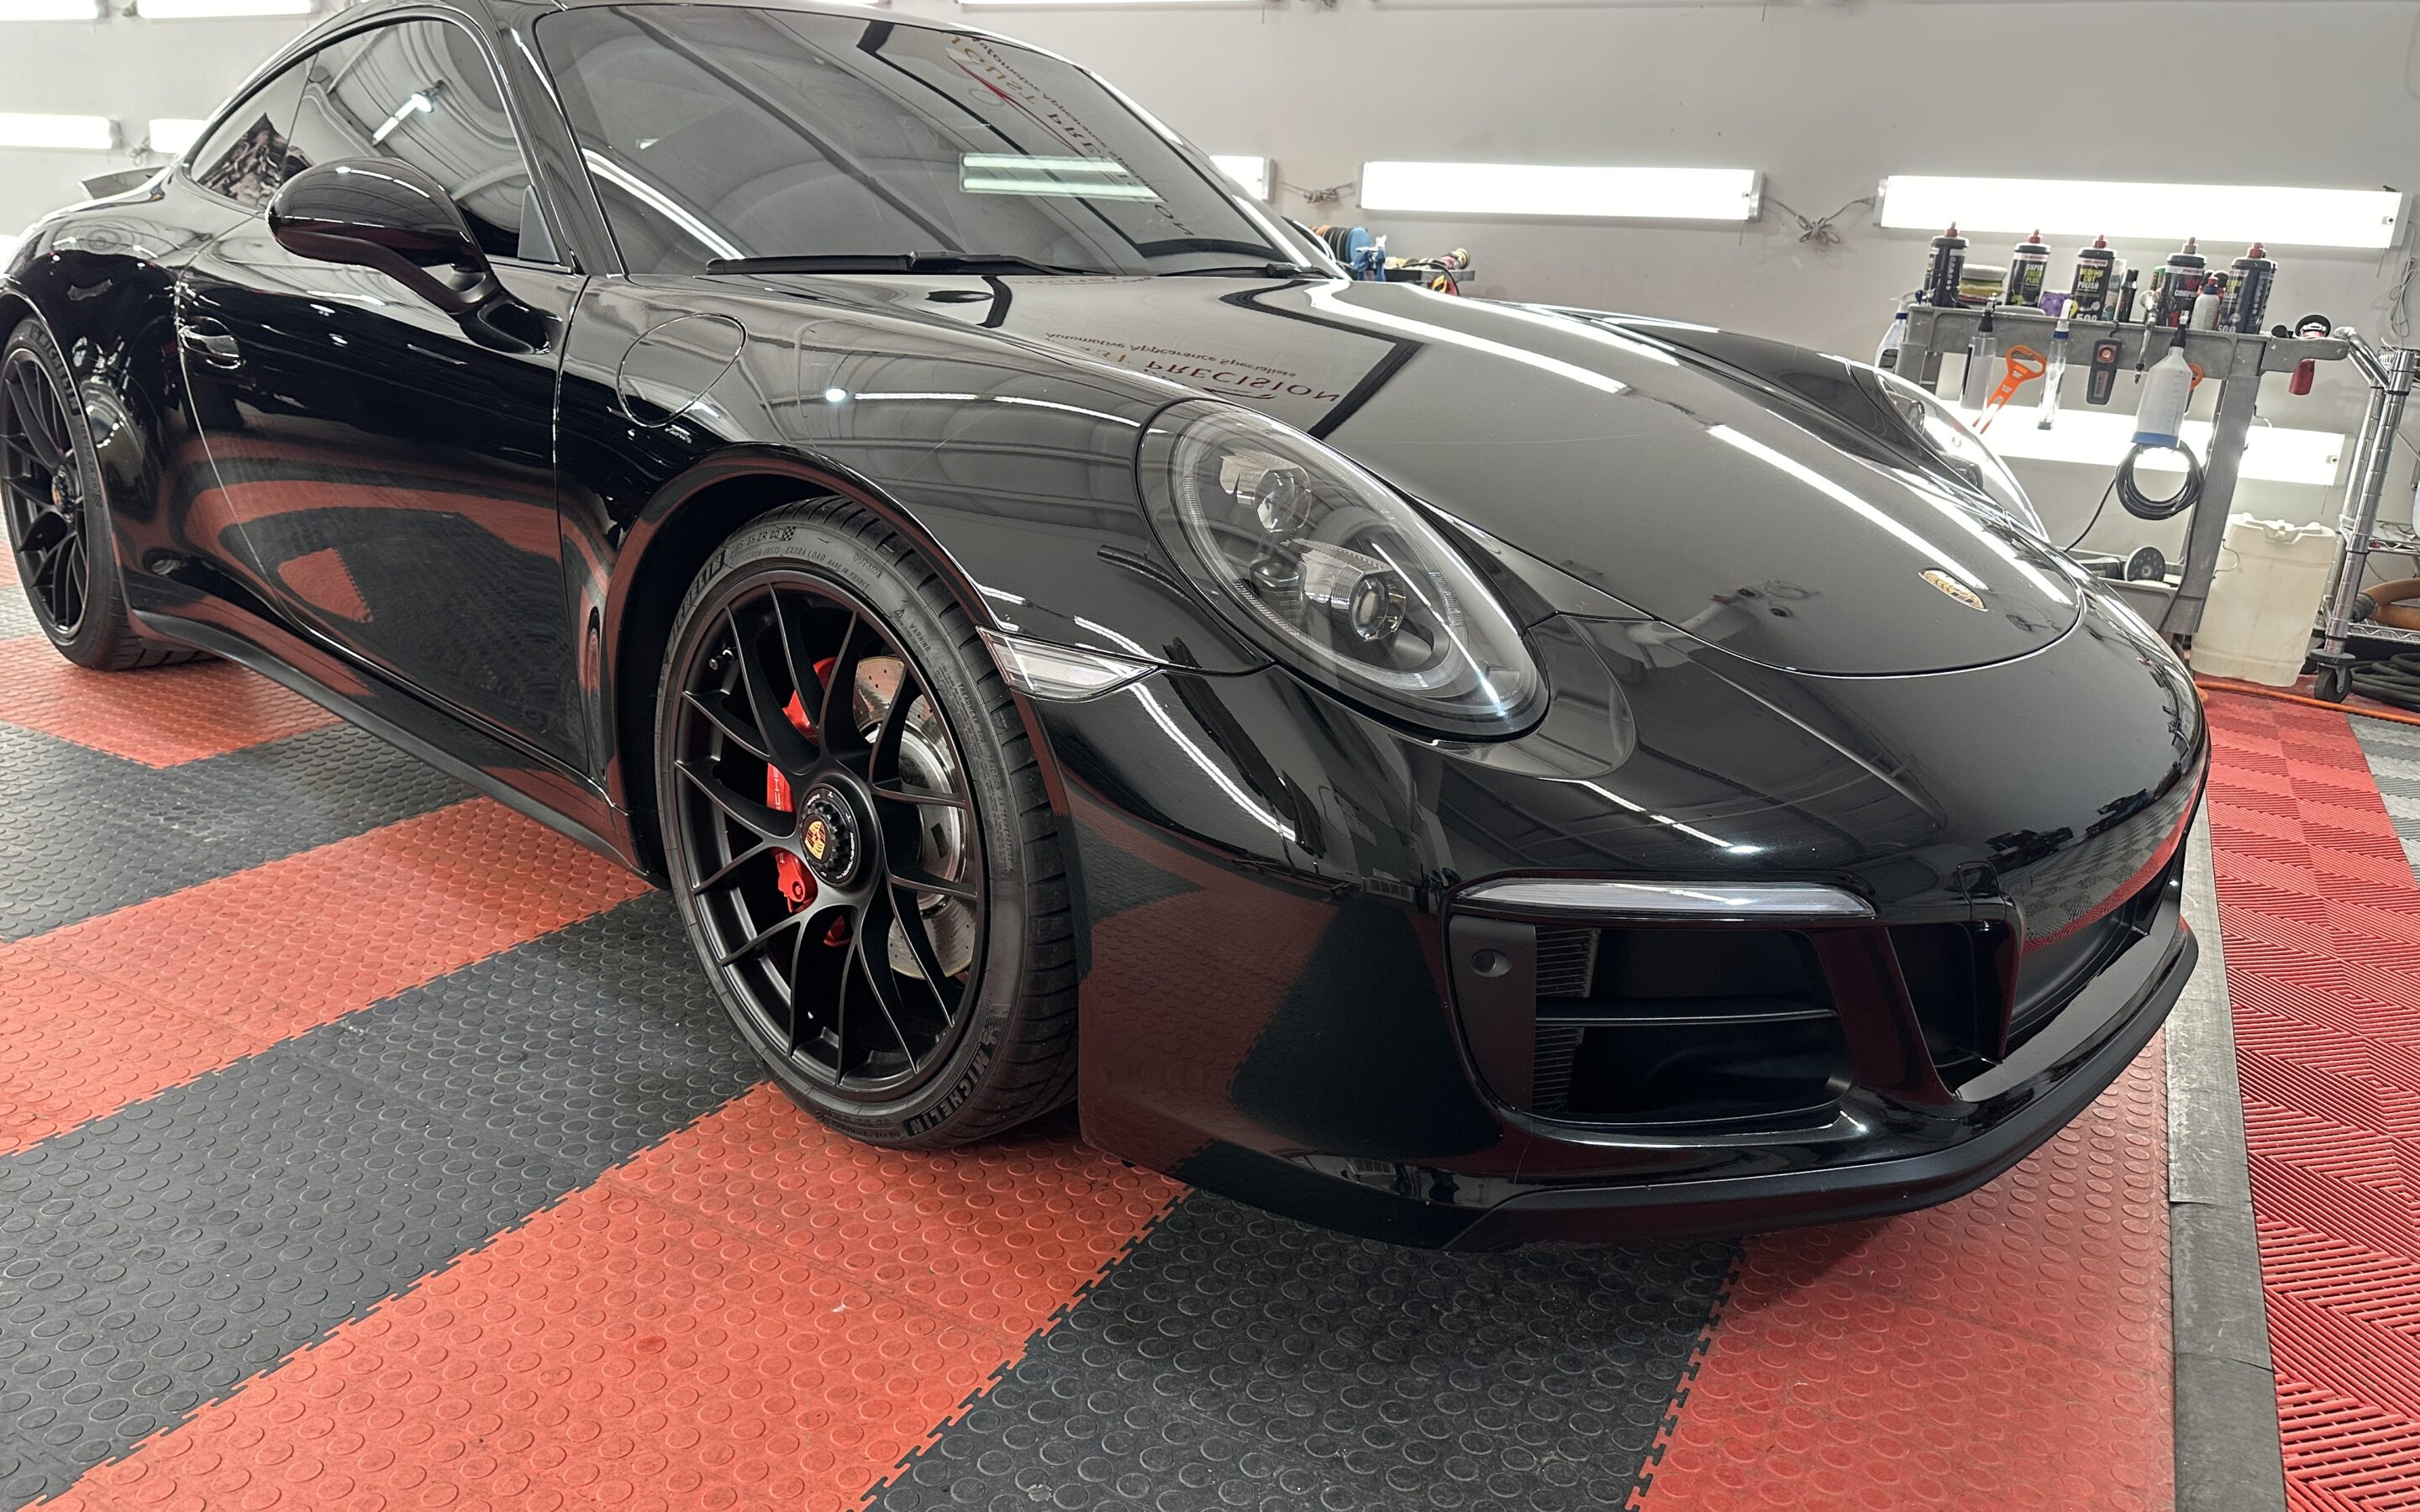 Enhance Your Porsche with Premium Ceramic Coating from August Precision